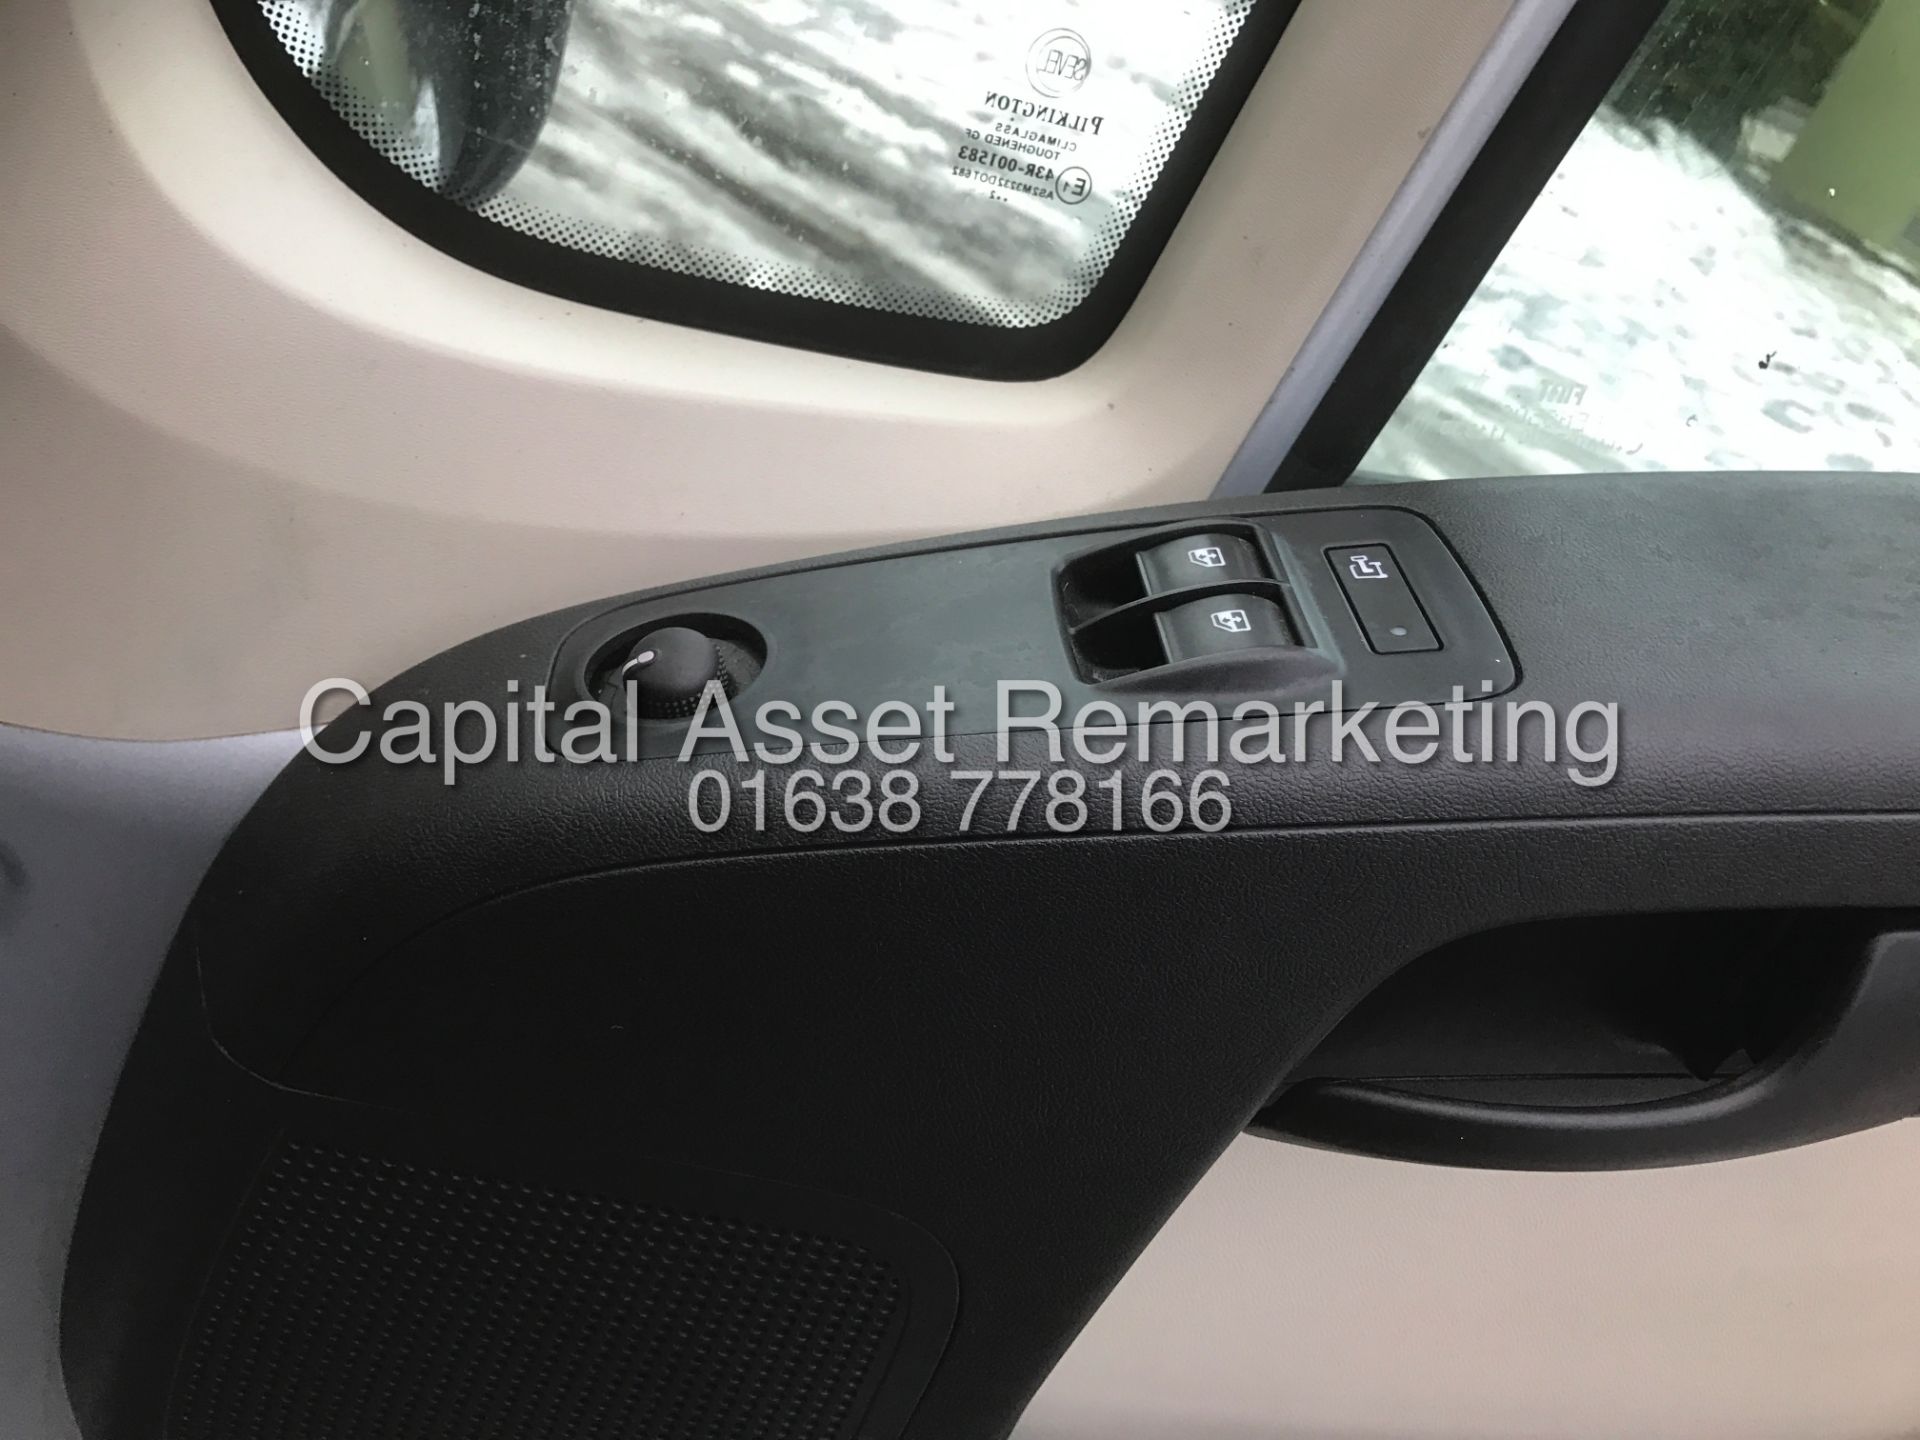 On Sale FIAT DUCATO 2.3 MULTIJET "130BHP 6 SPEED"(2013 MODEL - NEW SHAPE) 1 OWNER-AIR CON-ELEC PACK - Image 11 of 14